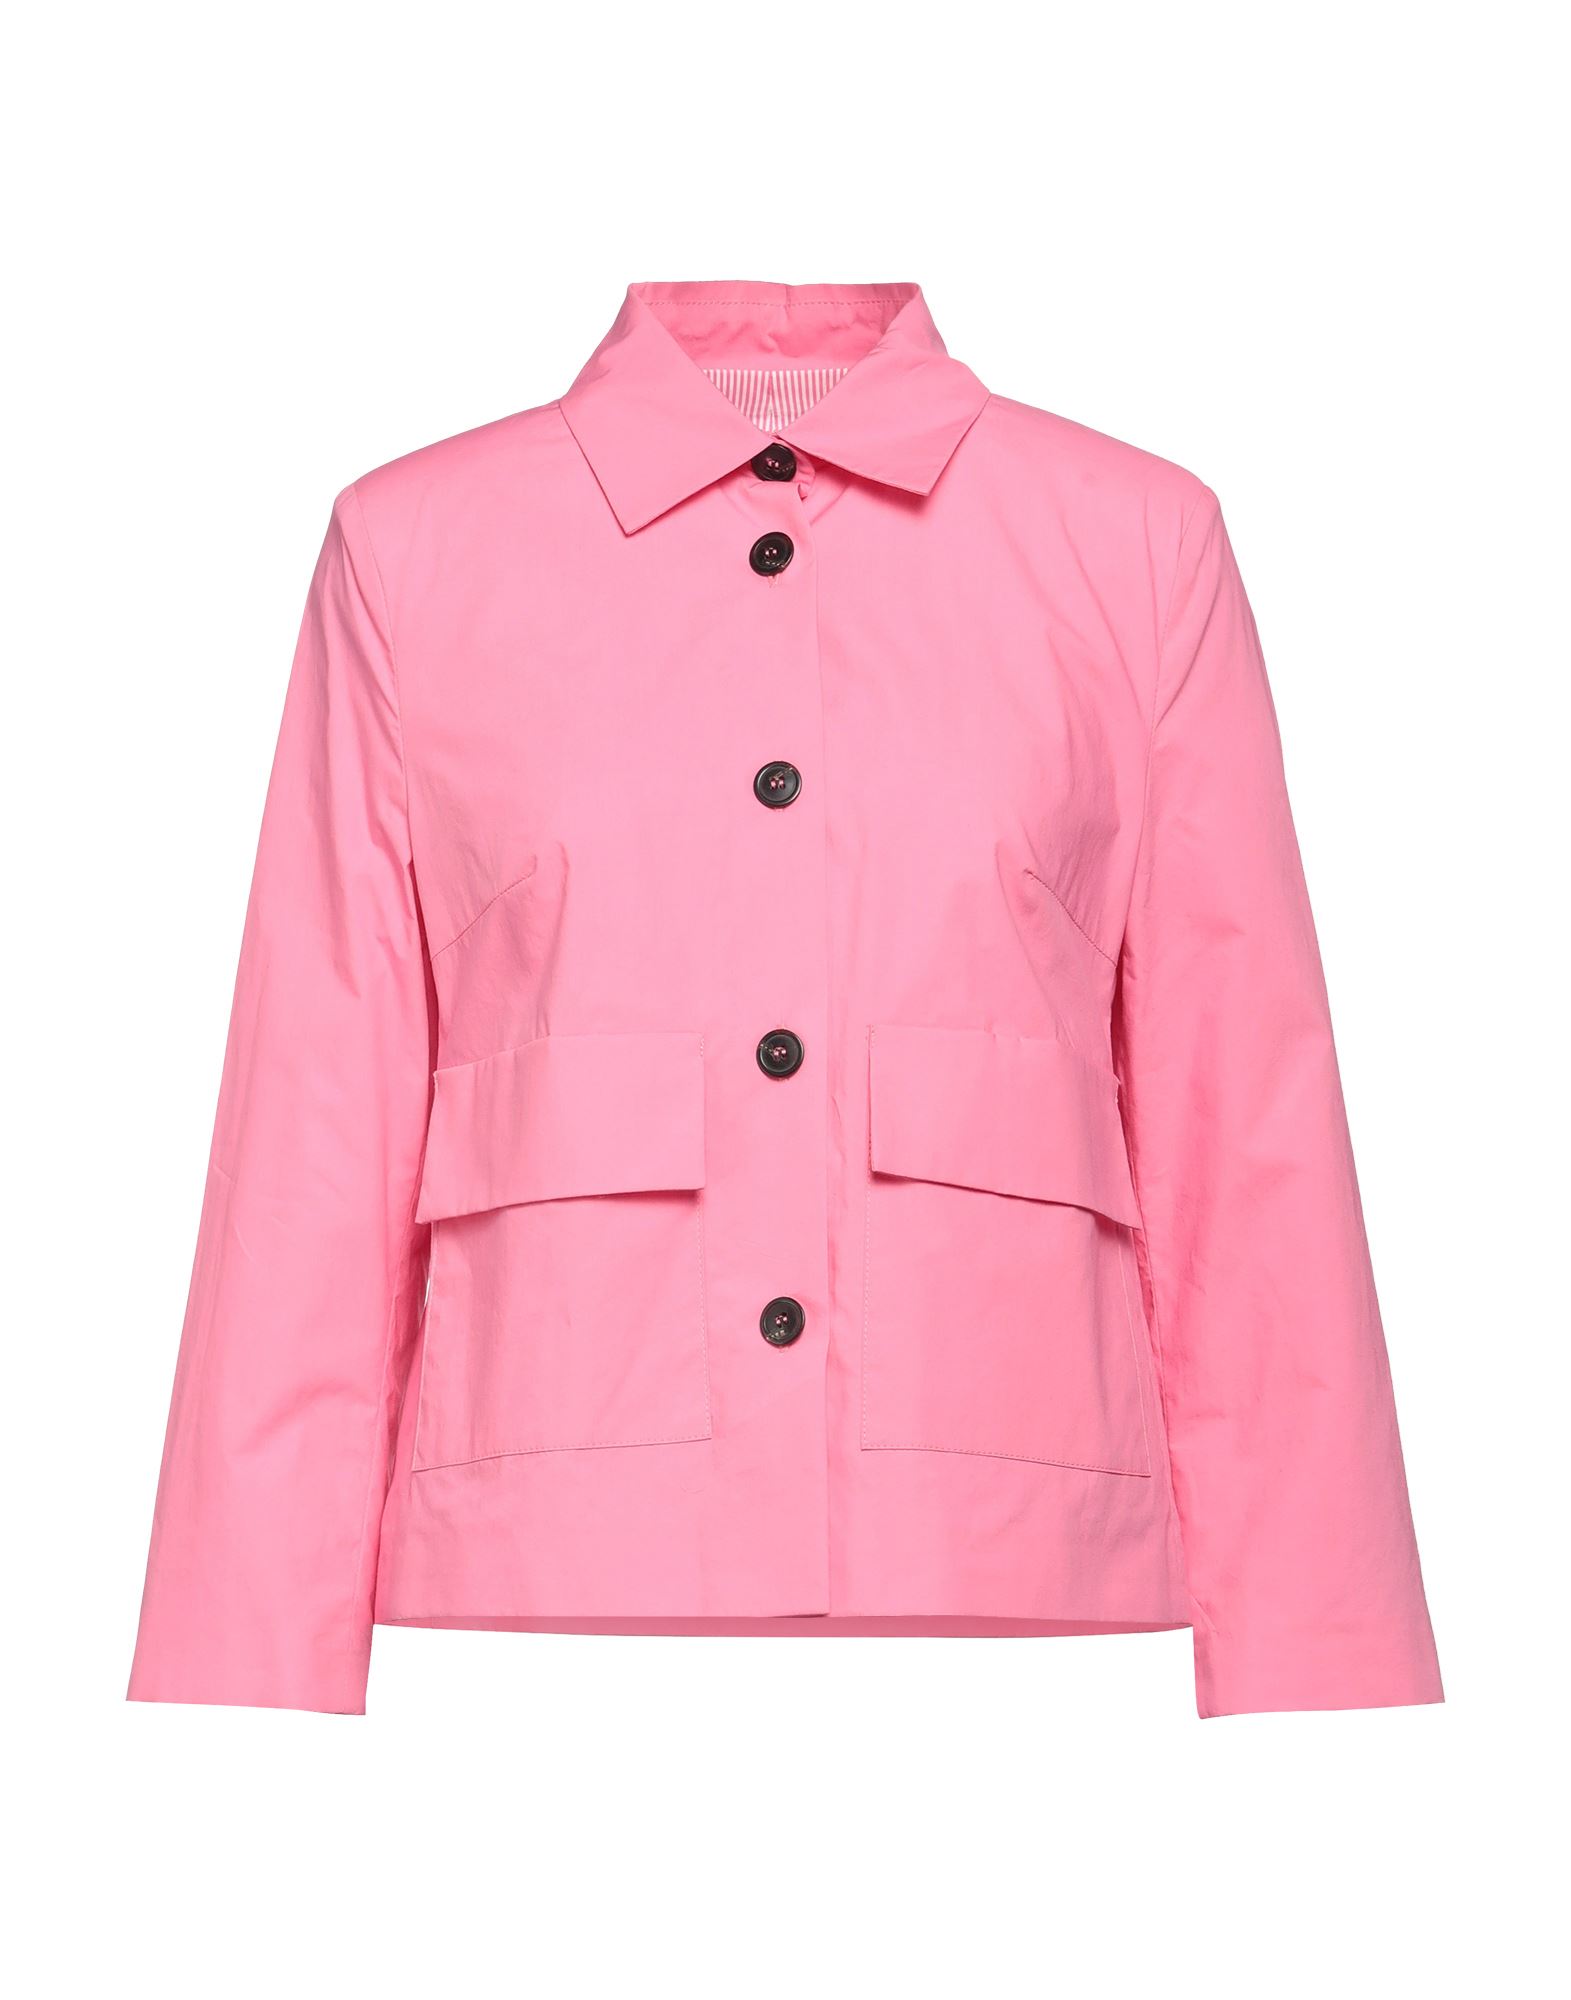 Shirtaporter Suit Jackets In Pink